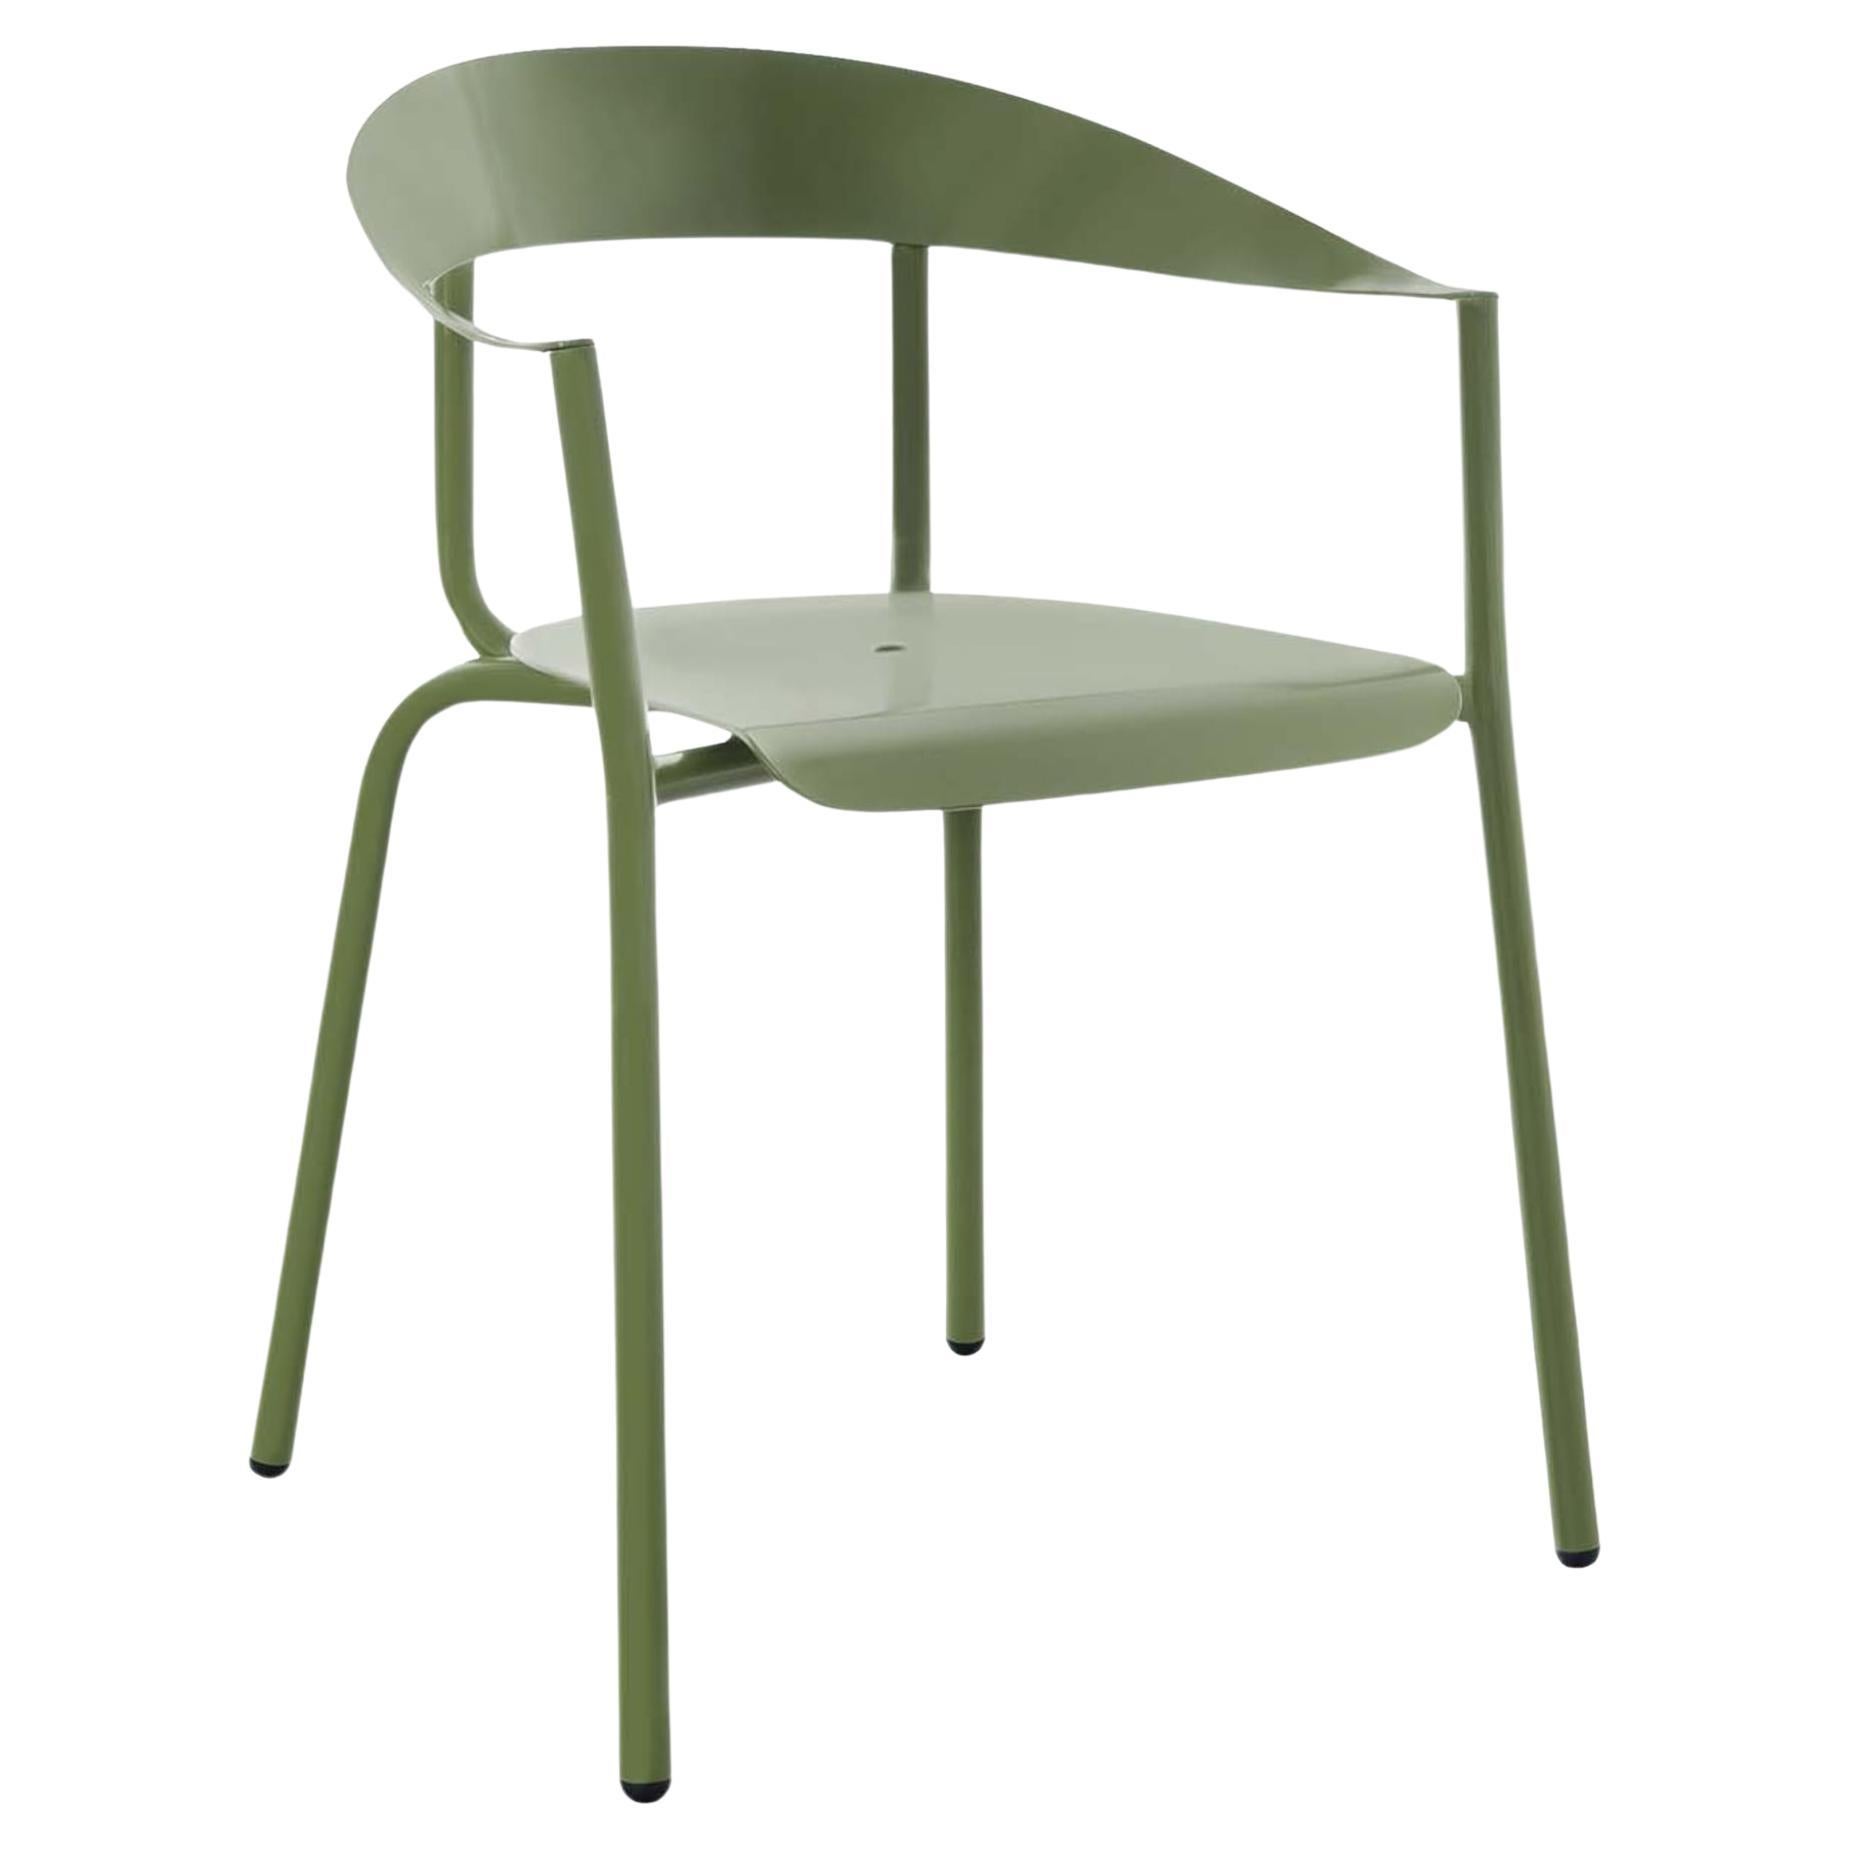 Olive Green AluMito Chair with Armrests by Pascal Bosetti